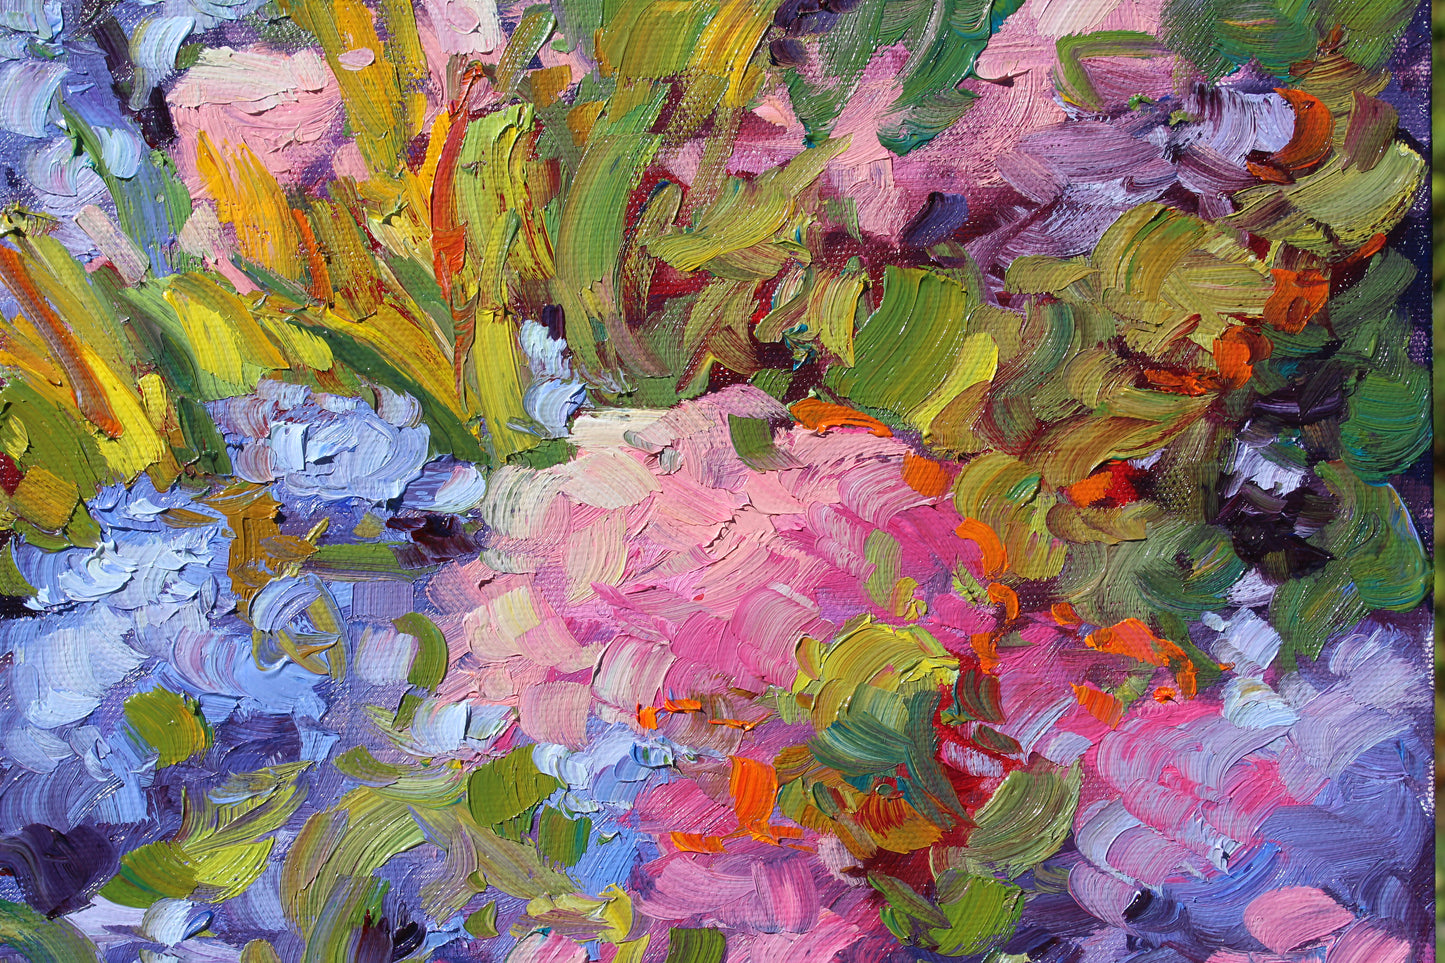 In Bloom, An Original 12" x 10" Floral Garden Oil On Canvas Panel